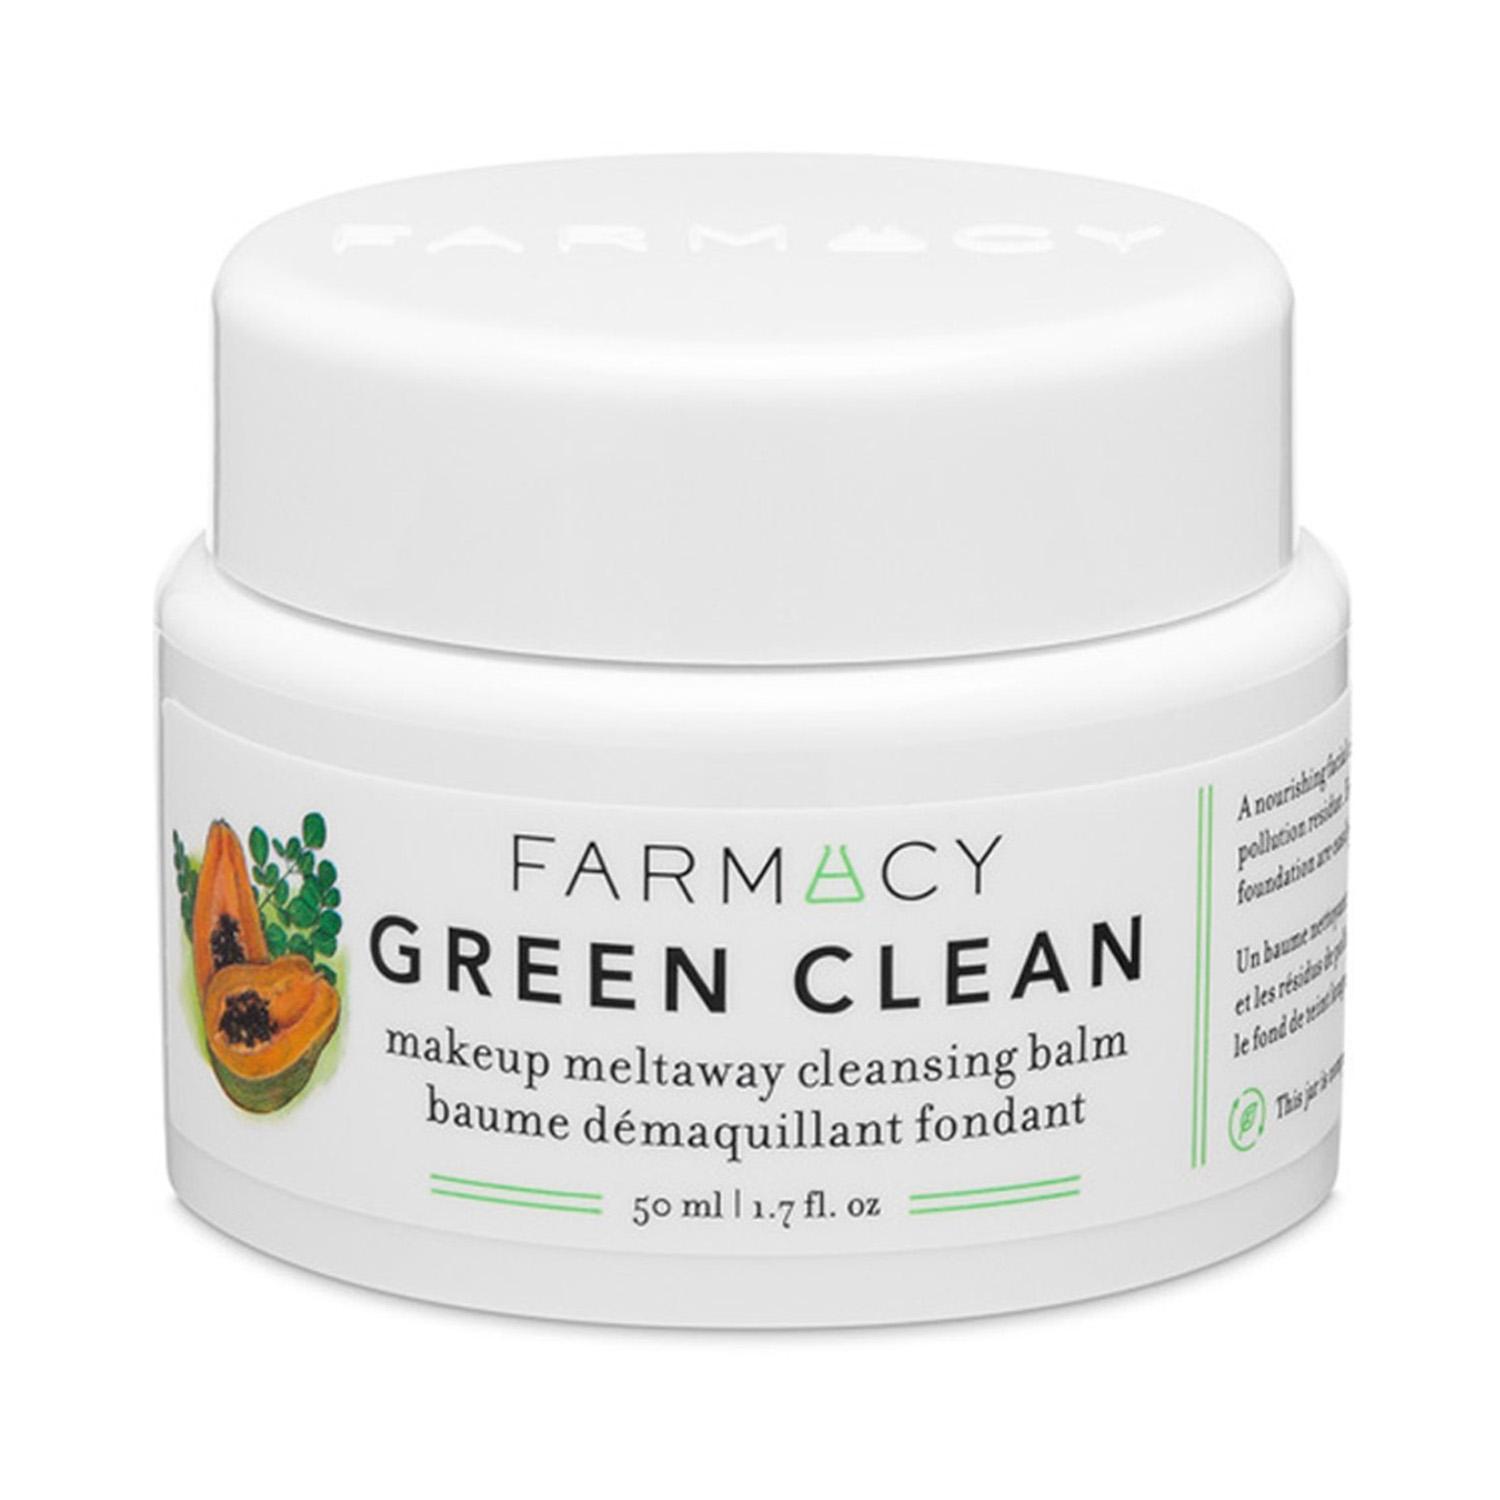 Farmacy Beauty | Farmacy Beauty Clearly Clean Makeup Removing Cleansing Balm (50ml)